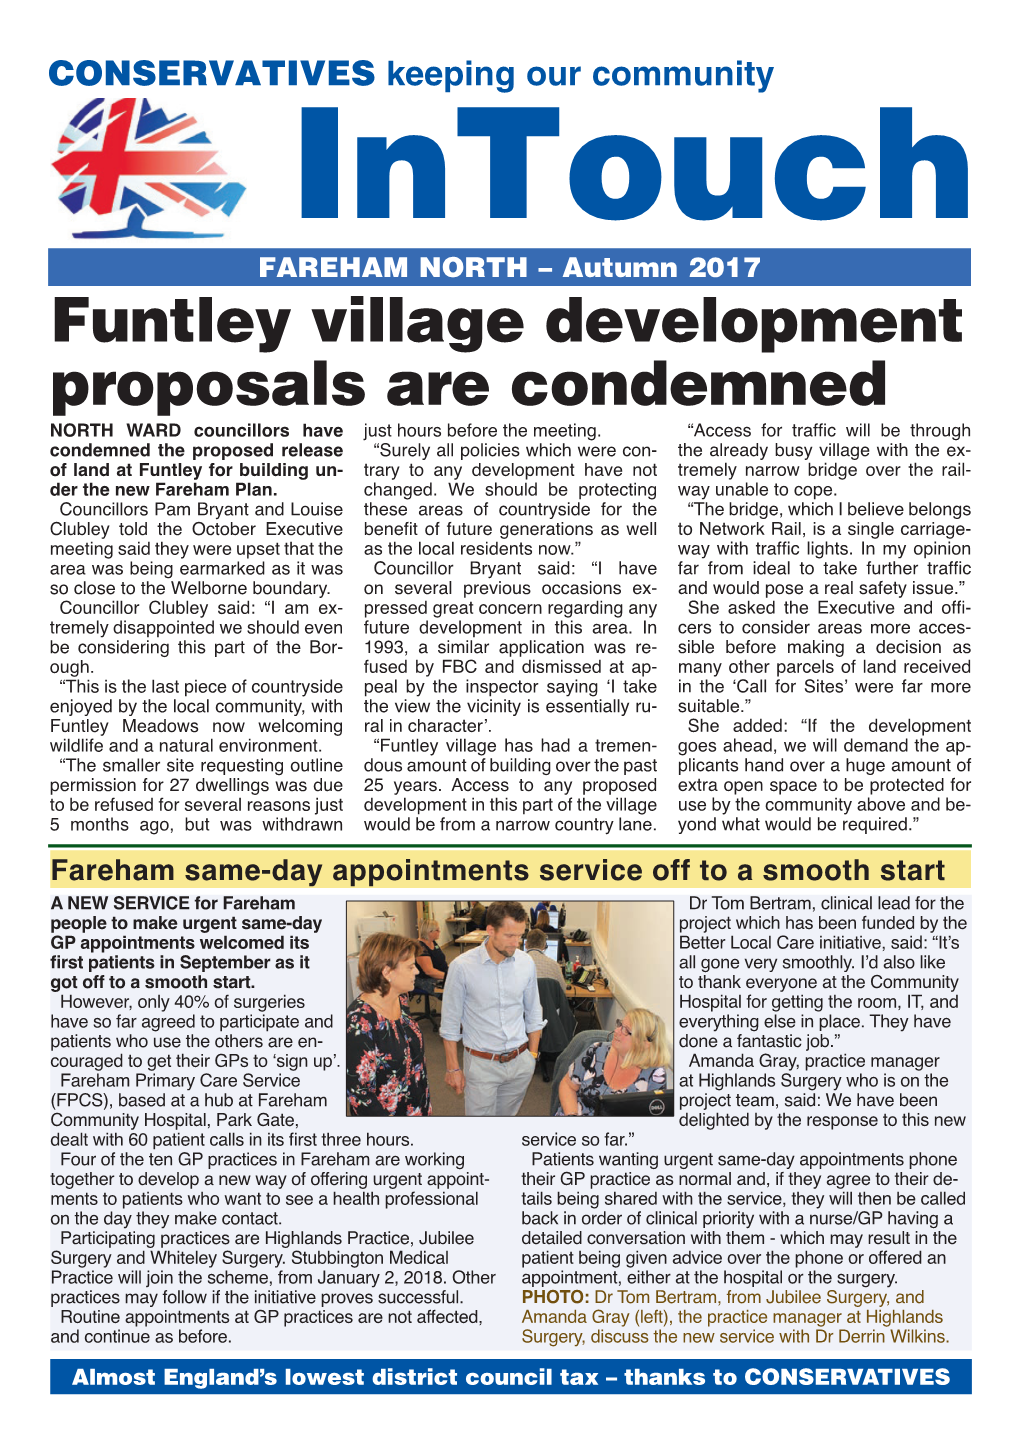 Funtley Village Development Proposals Are Condemned NORTH WARD Councillors Have Just Hours Before the Meeting